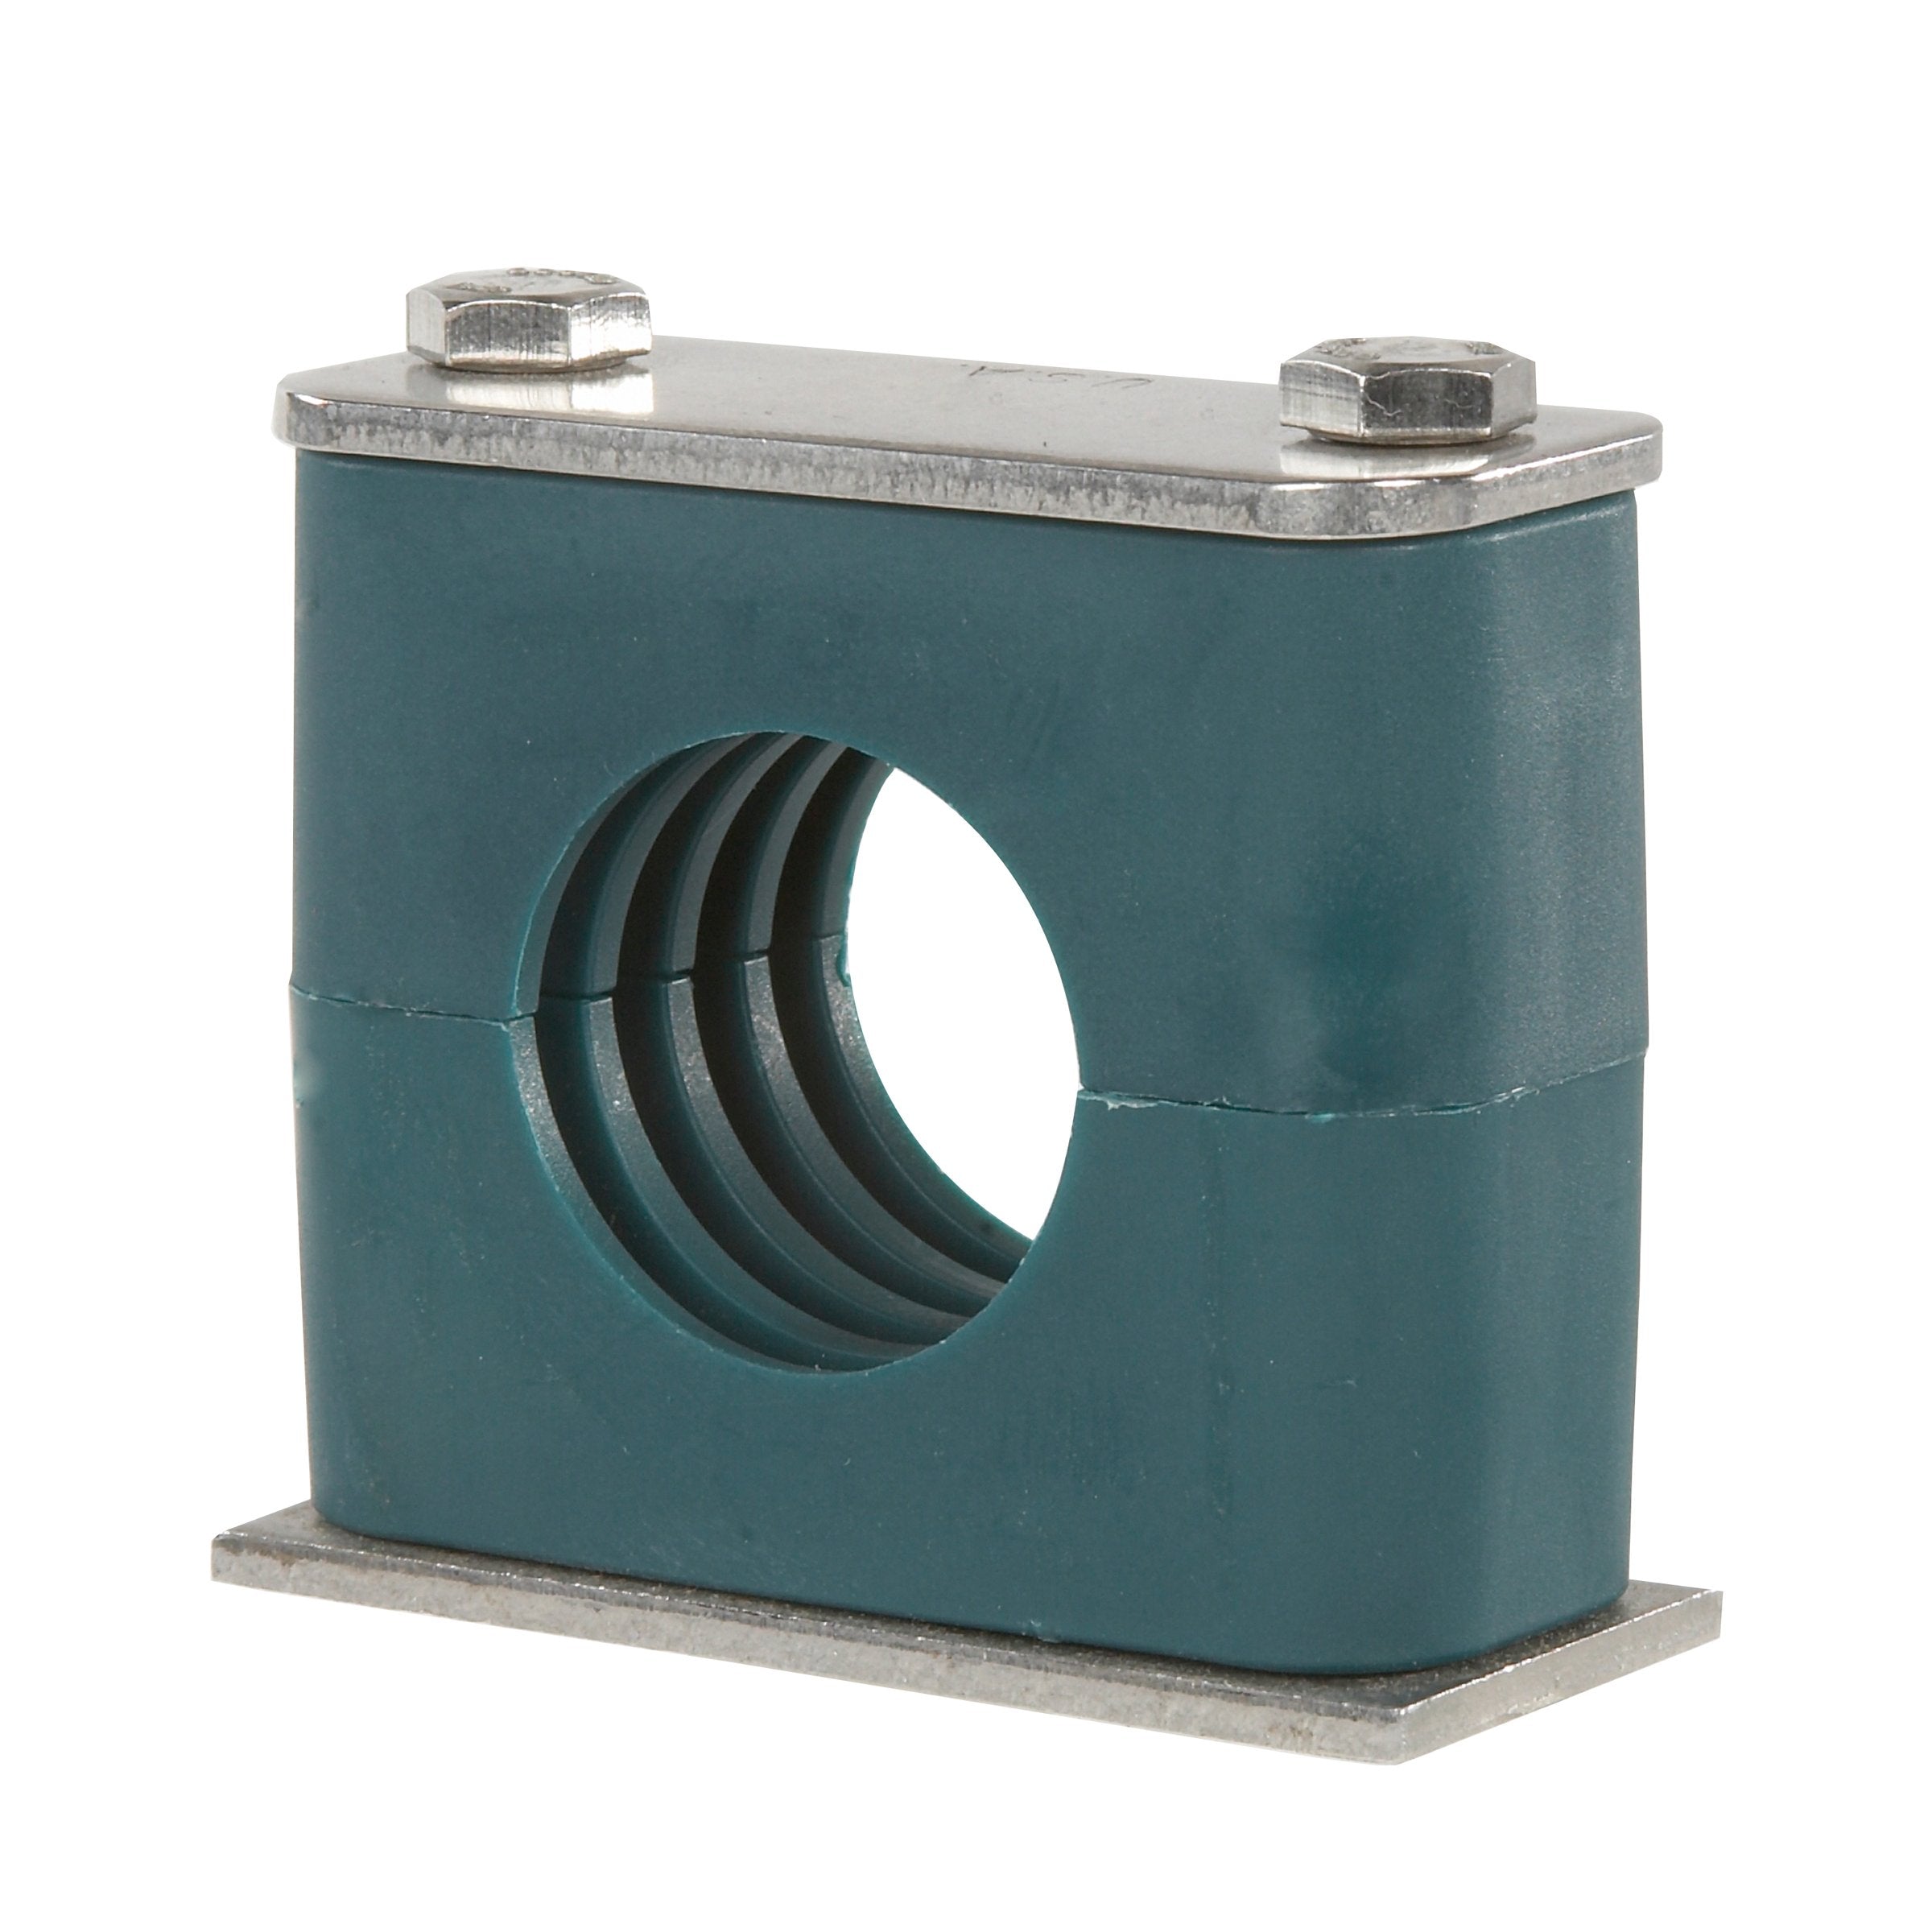 SP-650.8-PP-DP-AS-U-W10 : Stauff Clamp, Single Weld Plate, 2 inch (50.8mm) OD, for 2" Tube, Green PP Insert, Profiled Interior, Carbon Steel